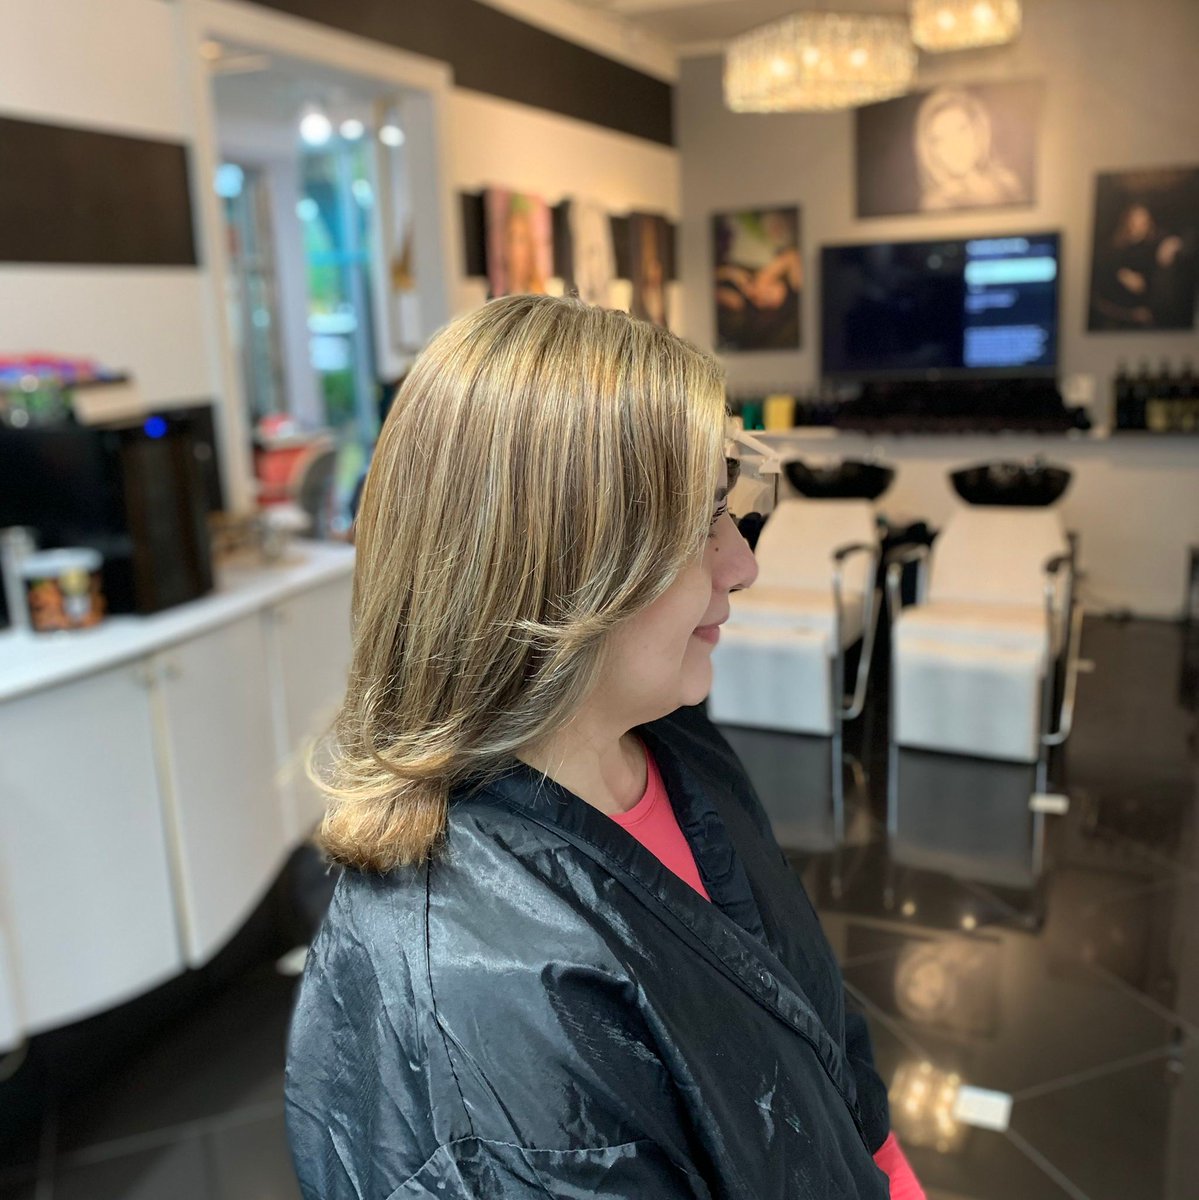 Lorena saw Ava for highlights, color and a haircut.  Gorgeous! 

#styliststhewoodlands #oribe #lavishthewoodlands #handtiedextensions #conroehairsalon #luxuryhair #houstonhairstylist #nbrextensions #wella #hairextensions #springhairstylist #htx #salonthewoodlands #houston